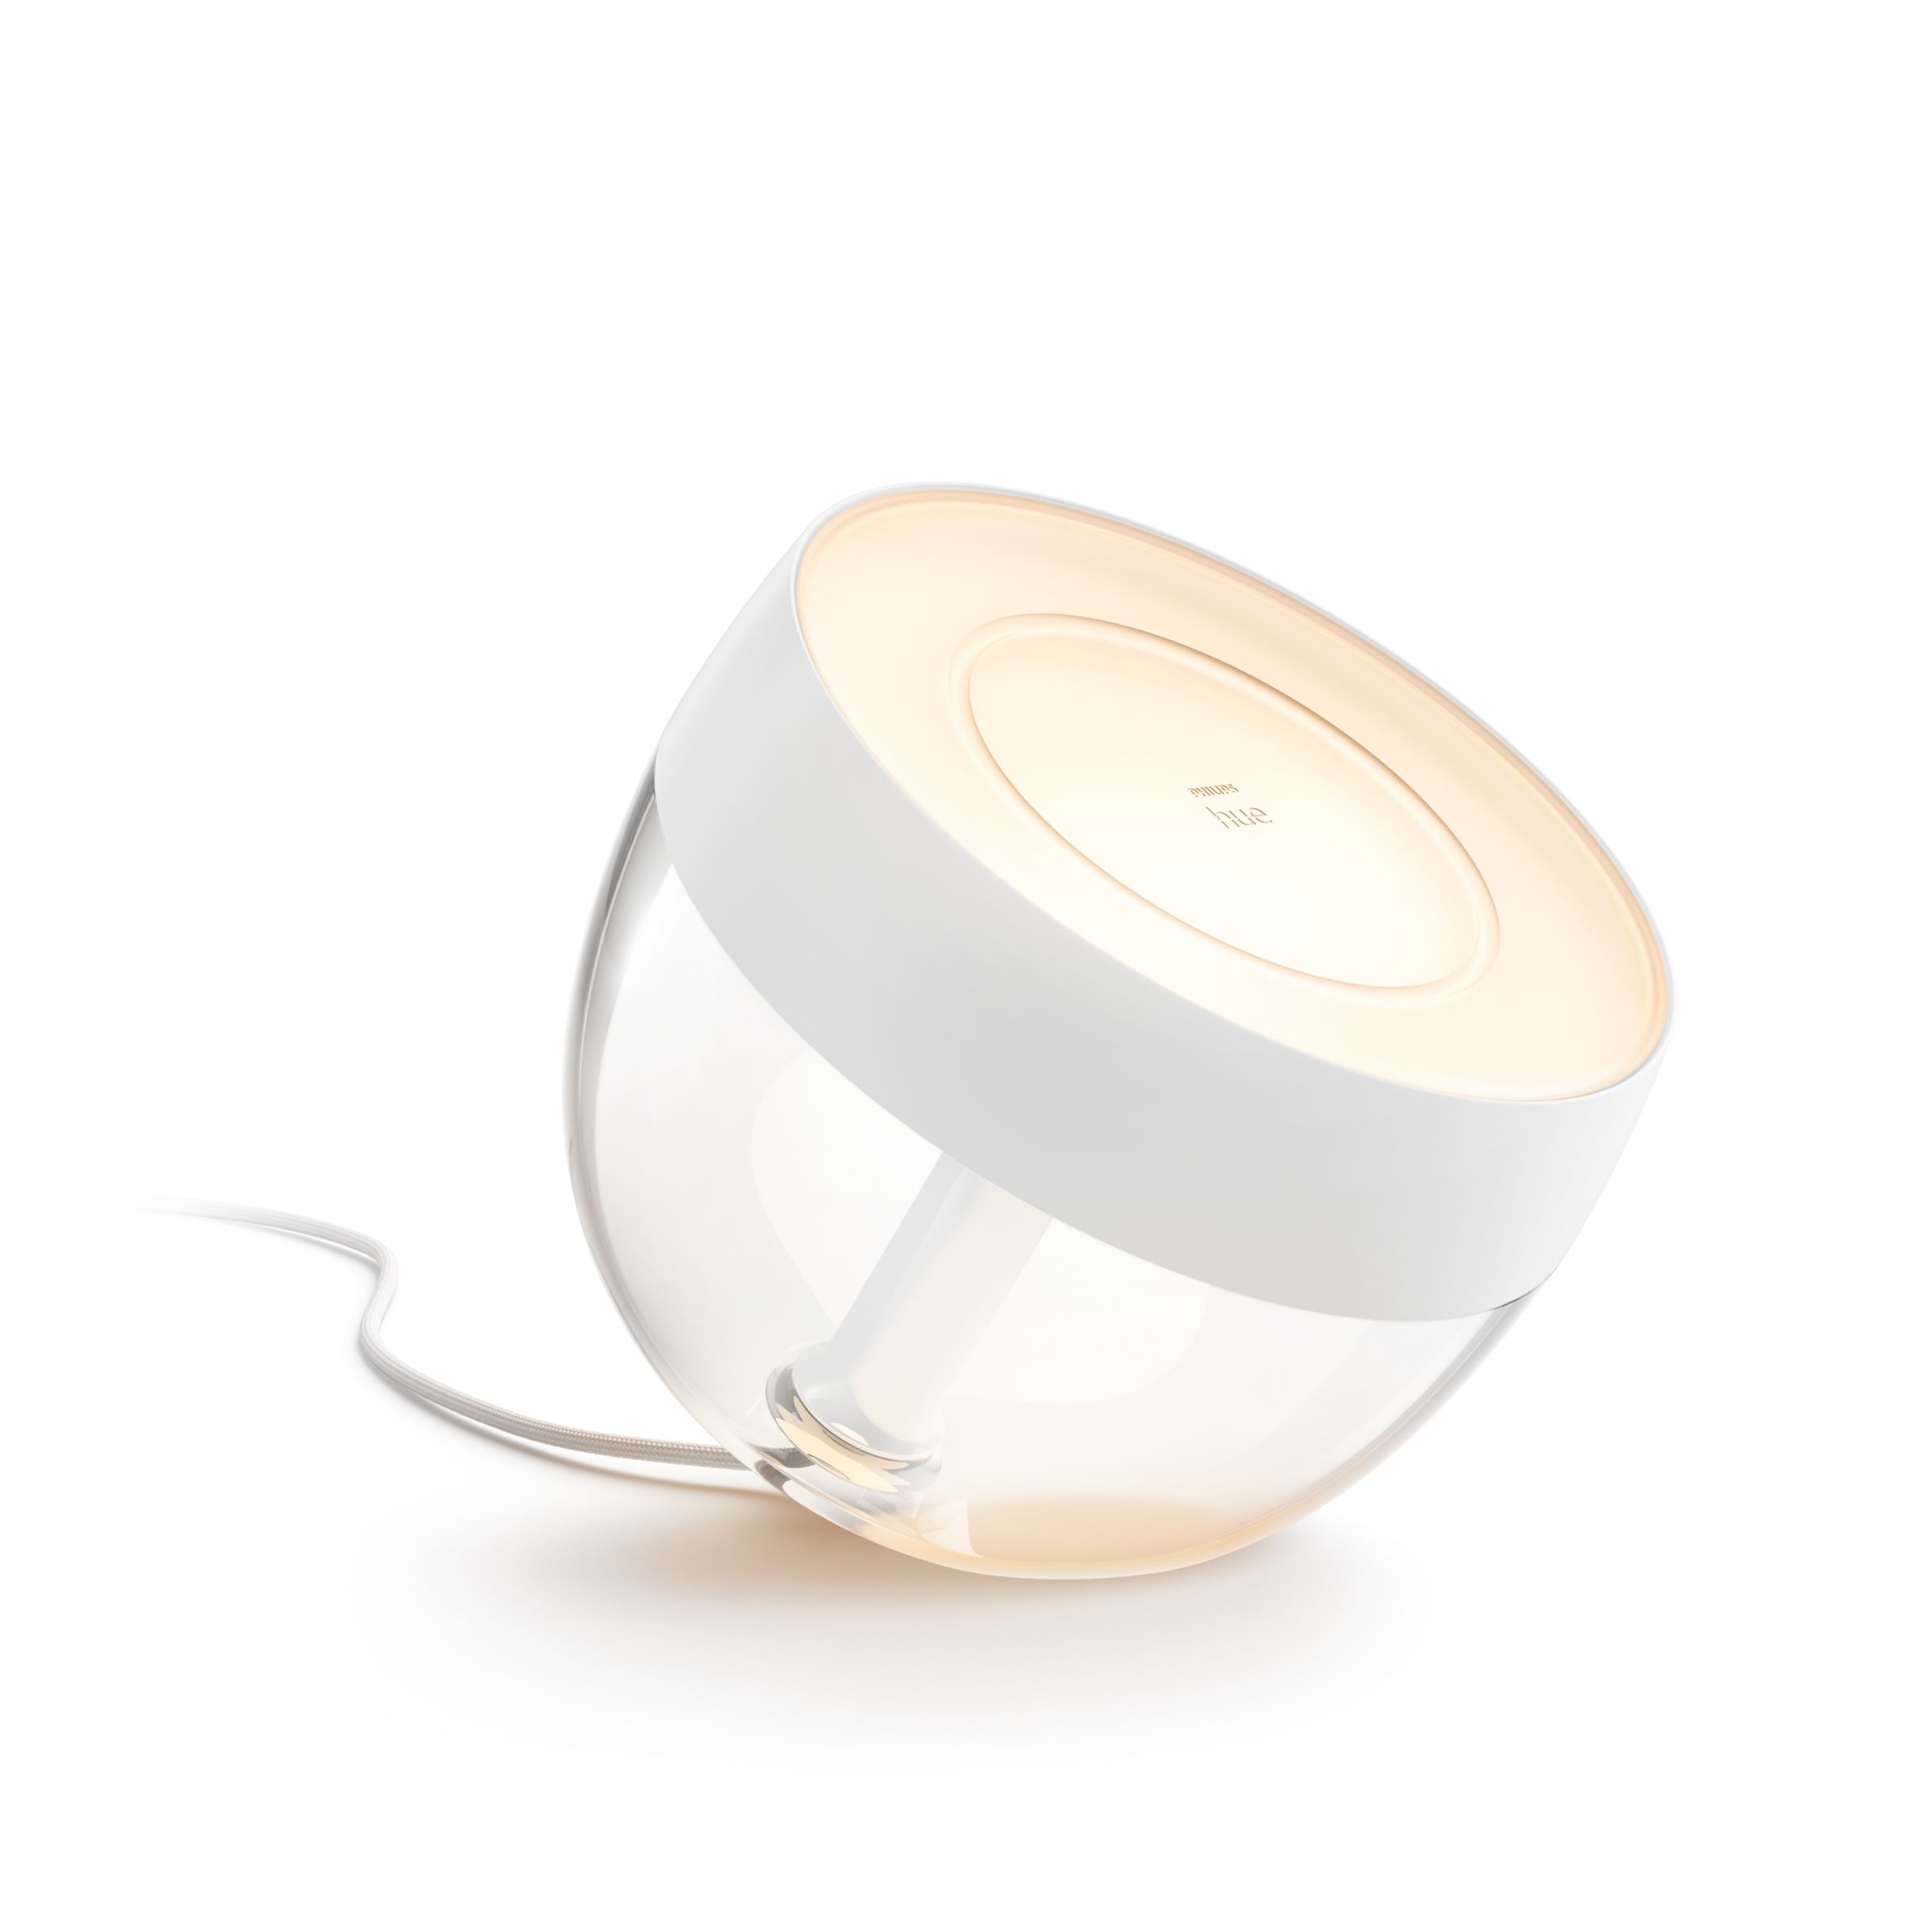 Philips Hue Iris review: This gorgeous accent light supports both Zigbee  and Bluetooth